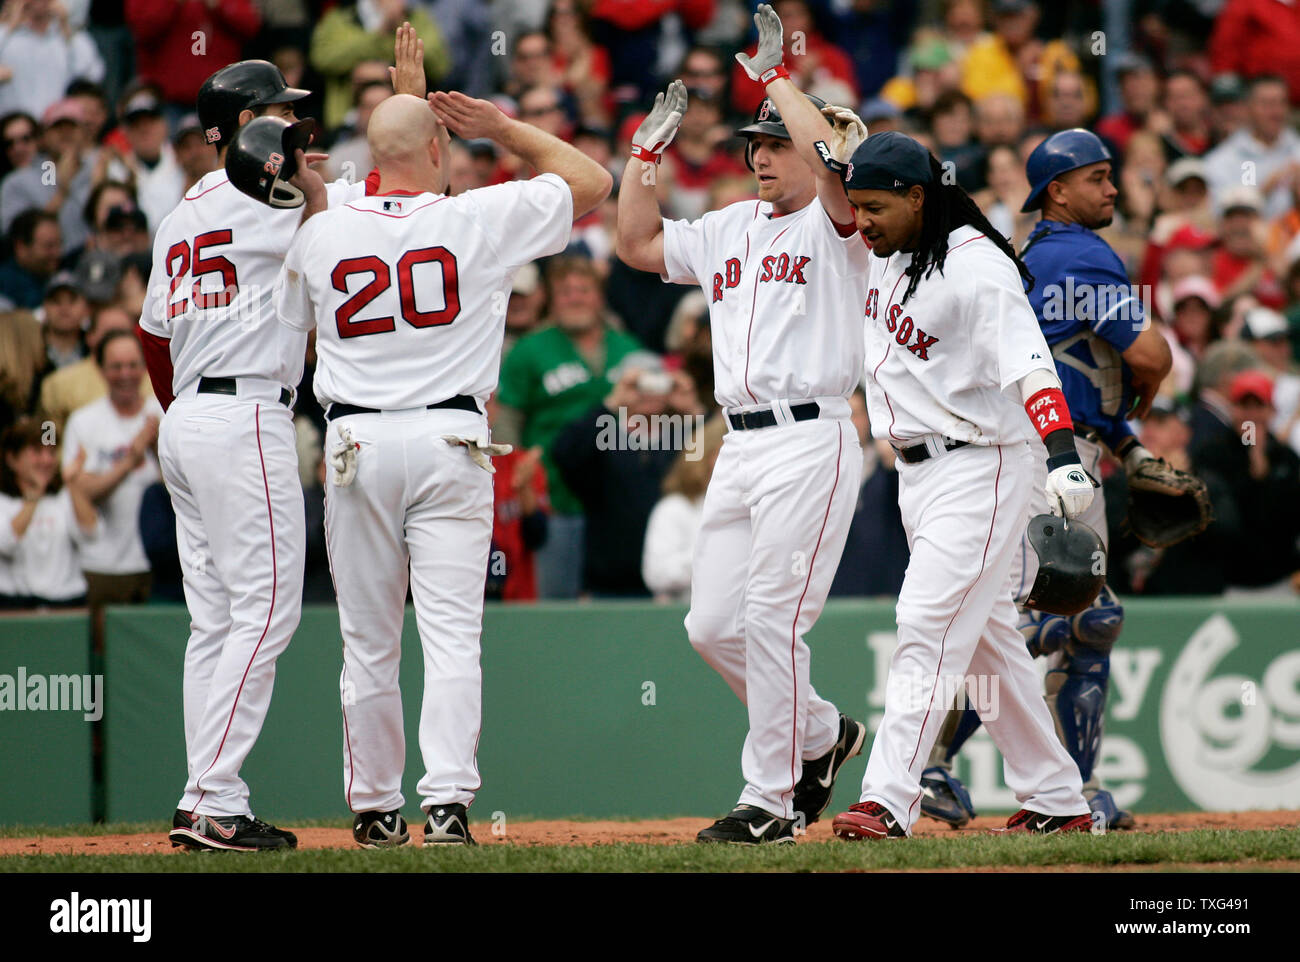 Jason Bay, J.D. Drew and Kevin Youkilis homer in Red Sox win over Tampa Bay